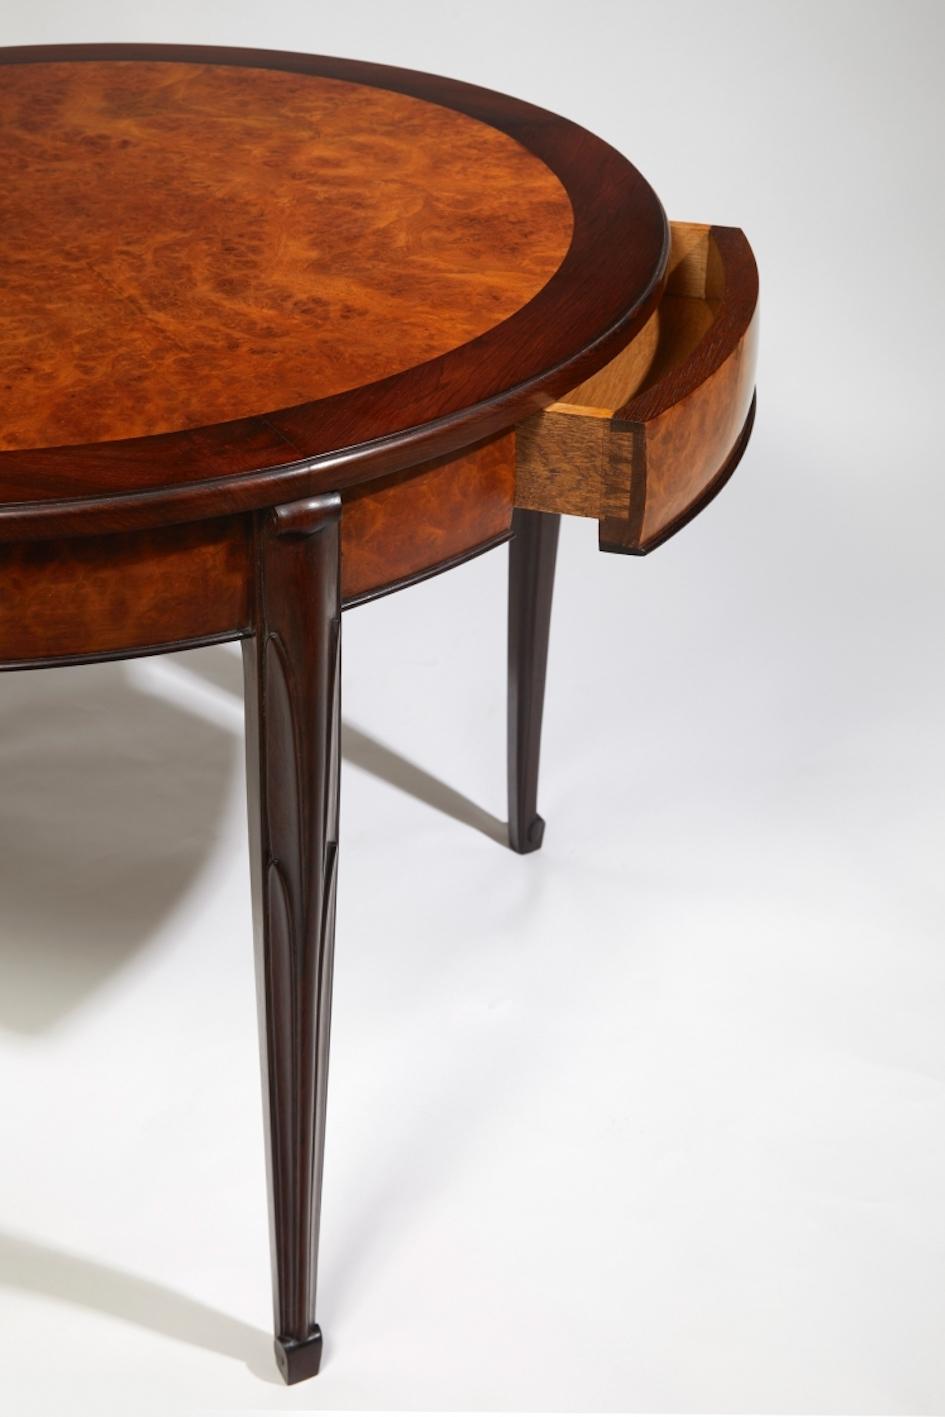 French Süe & Mare, Side Table in Wood and Thuya Circular, circa 1925